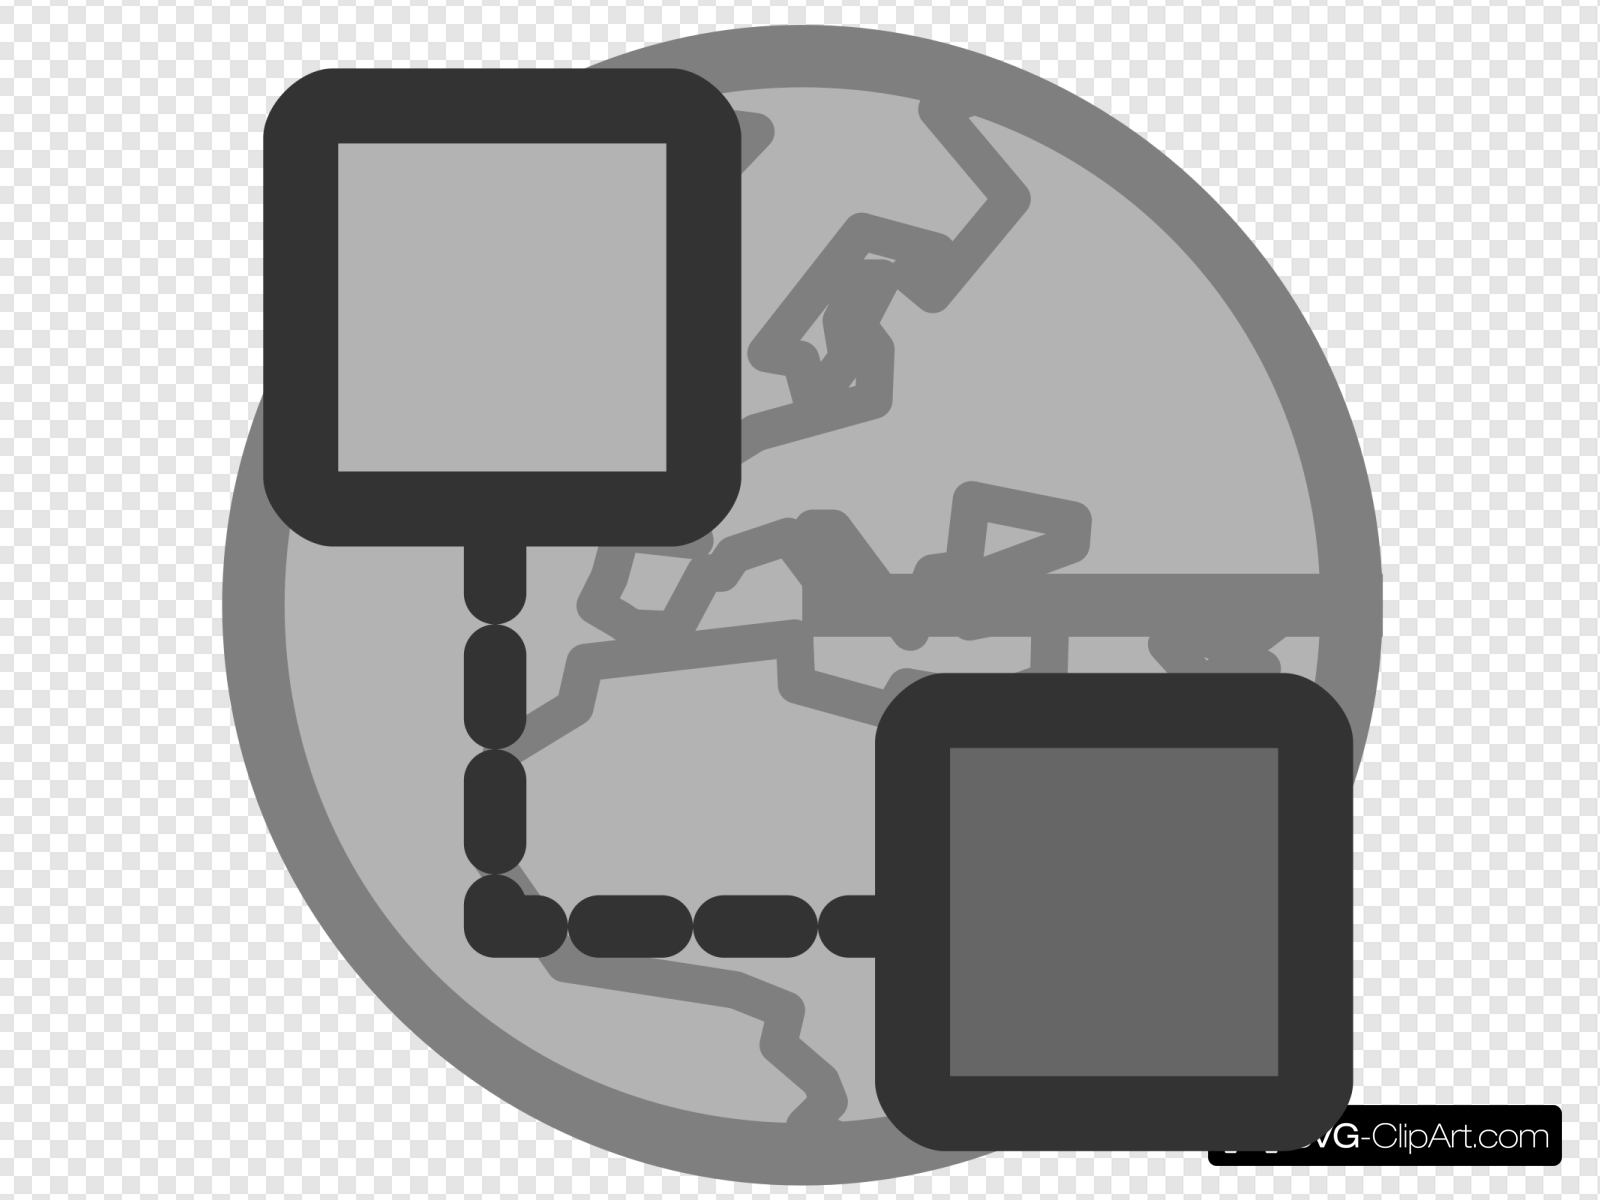 Internet Connection Clip art, Icon and SVG.